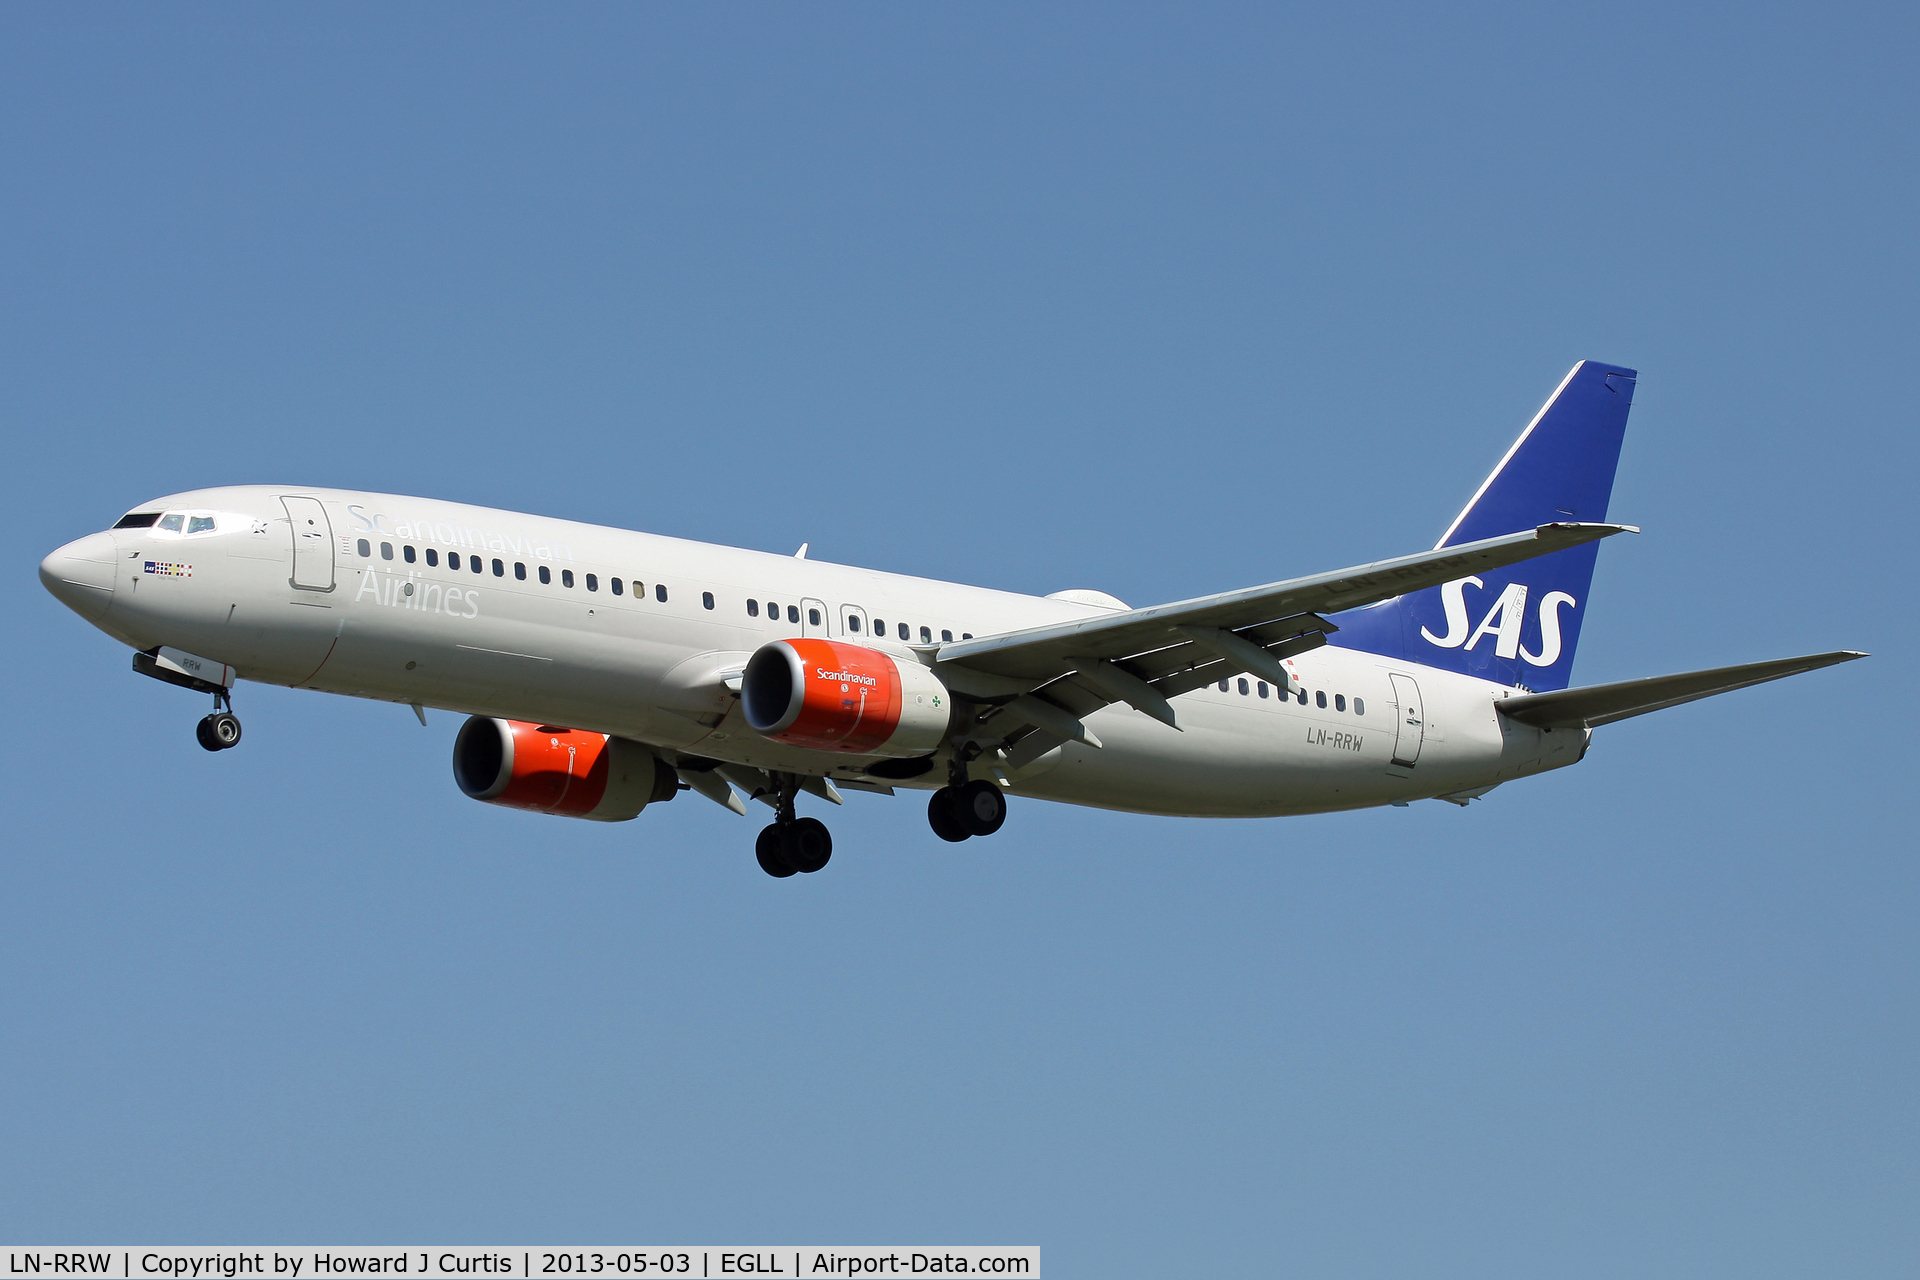 LN-RRW, 2004 Boeing 737-883 C/N 32277, Scandinavian Airlines, on approach to runway 27L.